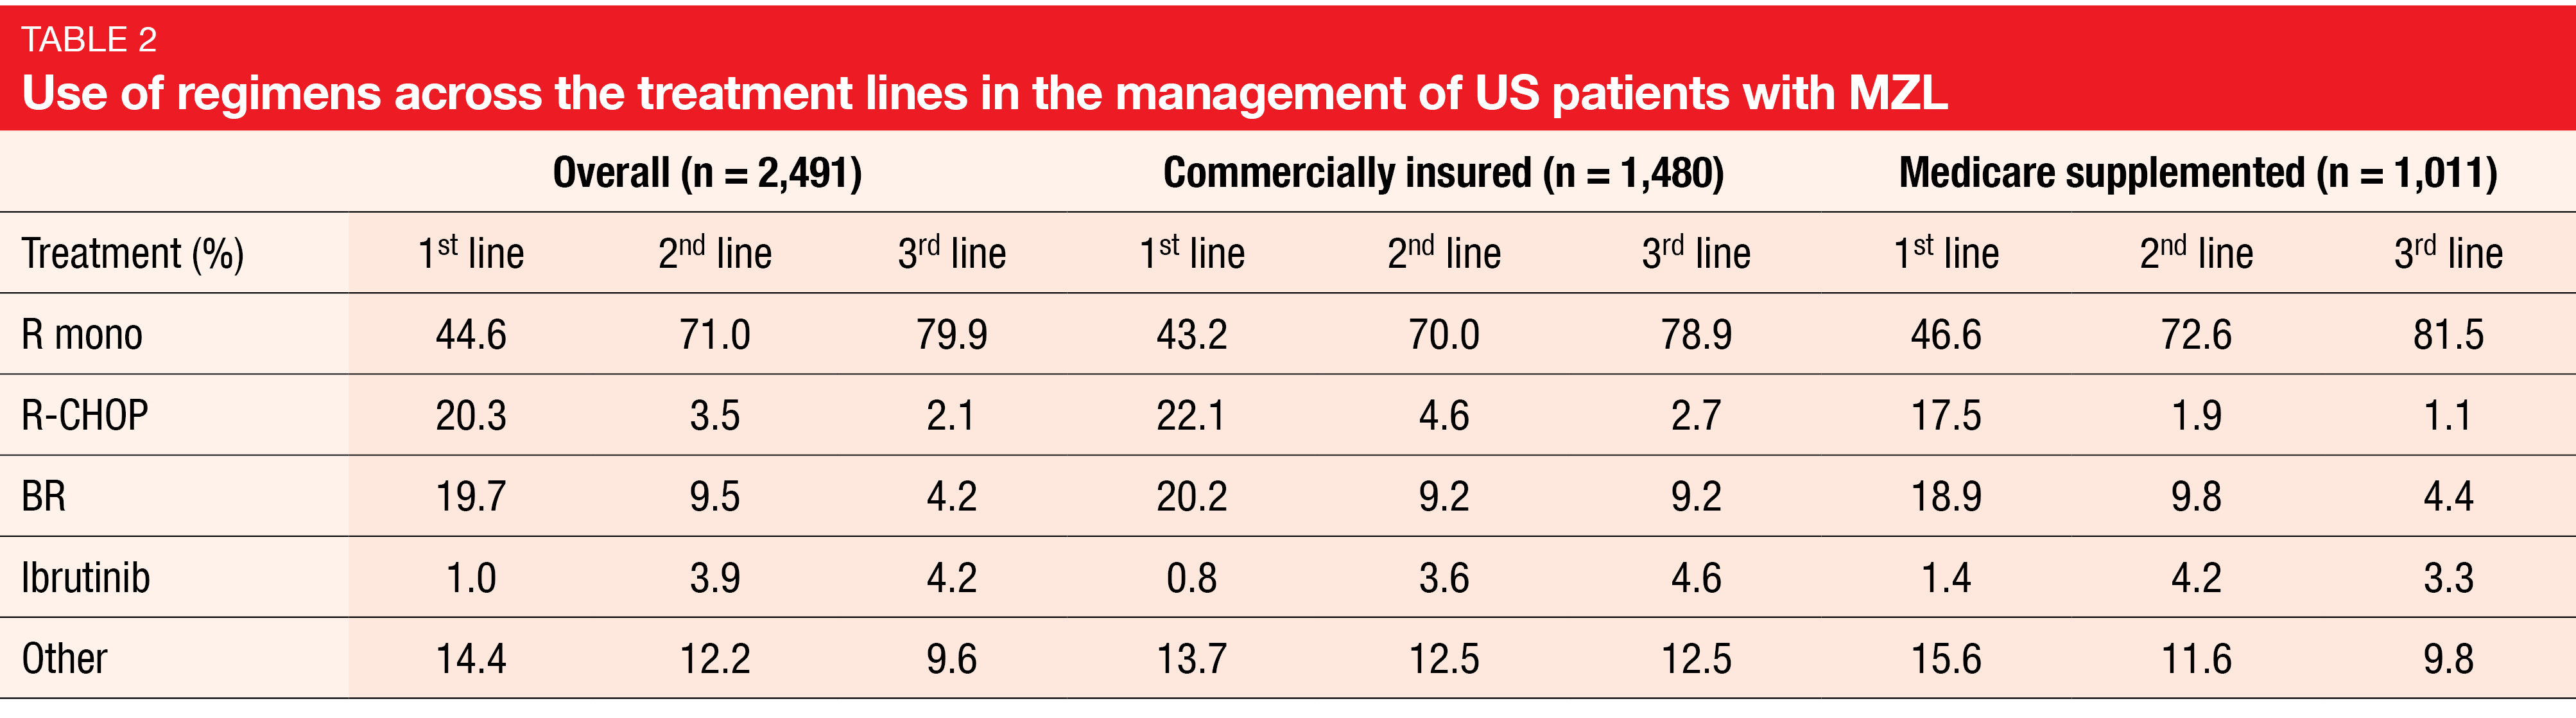 Table 2 Use of regimens across the treatment lines in the management of US patients with MZL